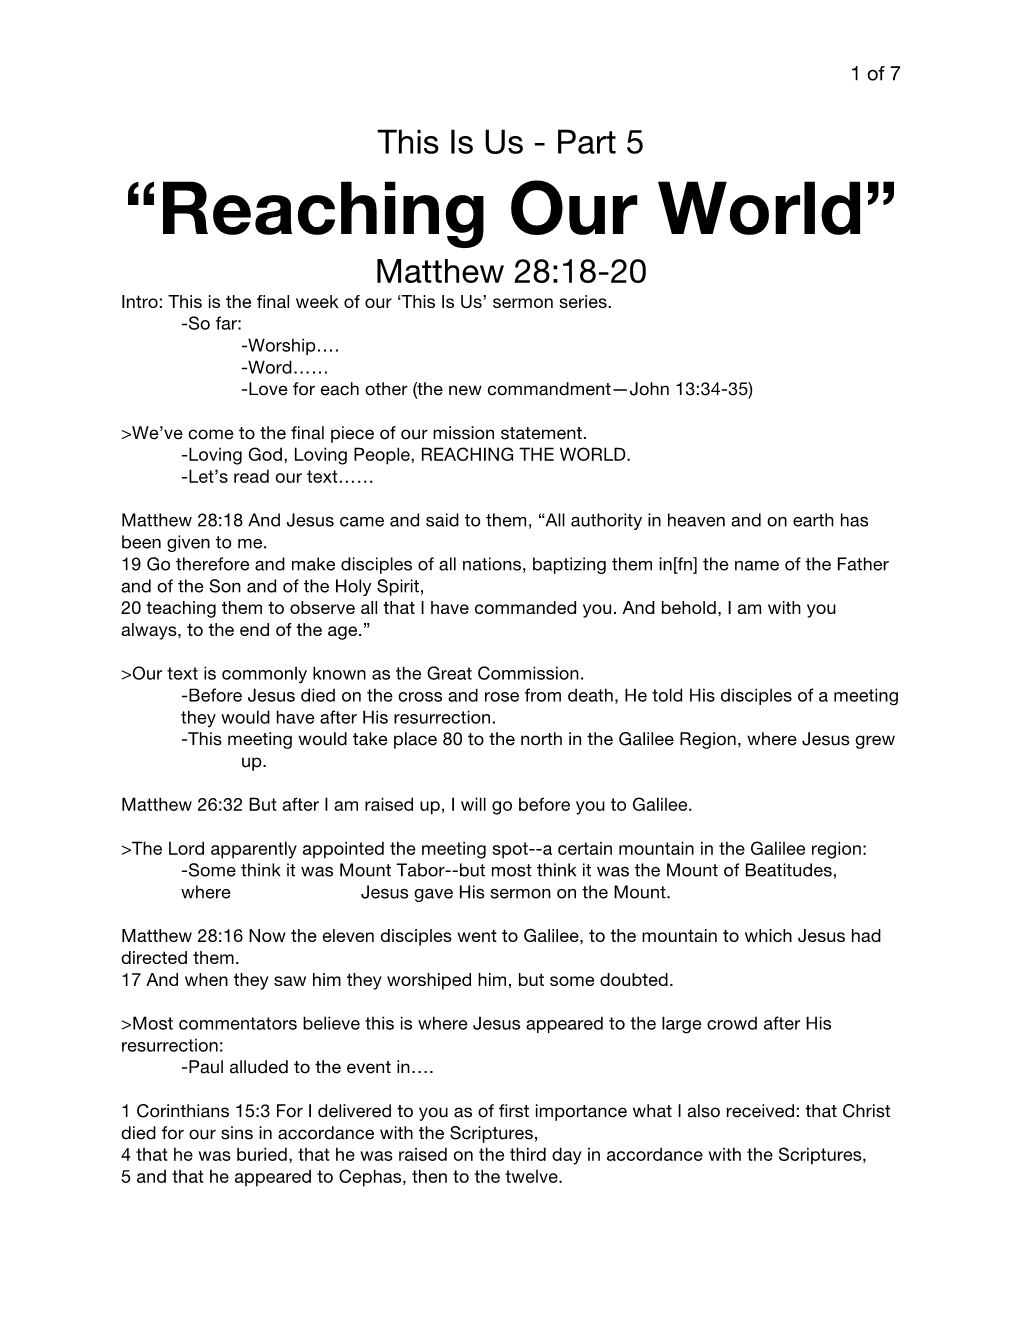 “Reaching Our World” Matthew 28:18-20 Intro: This Is the Final Week of Our ‘This Is Us’ Sermon Series